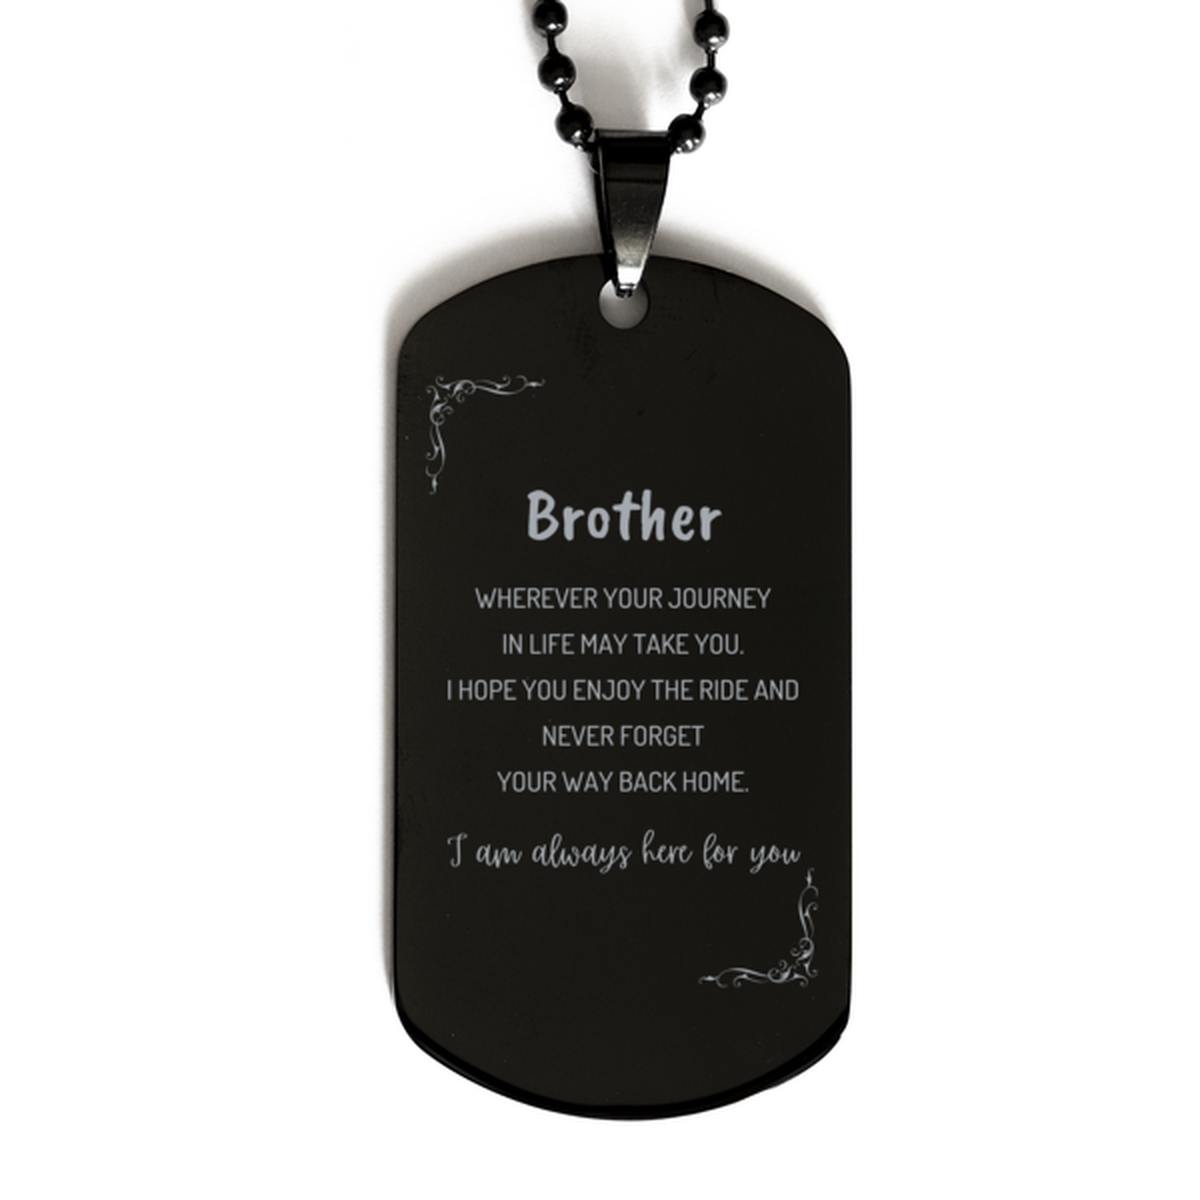 Brother wherever your journey in life may take you, I am always here for you Brother Black Dog Tag, Awesome Christmas Gifts For Brother, Brother Birthday Gifts for Men Women Family Loved One